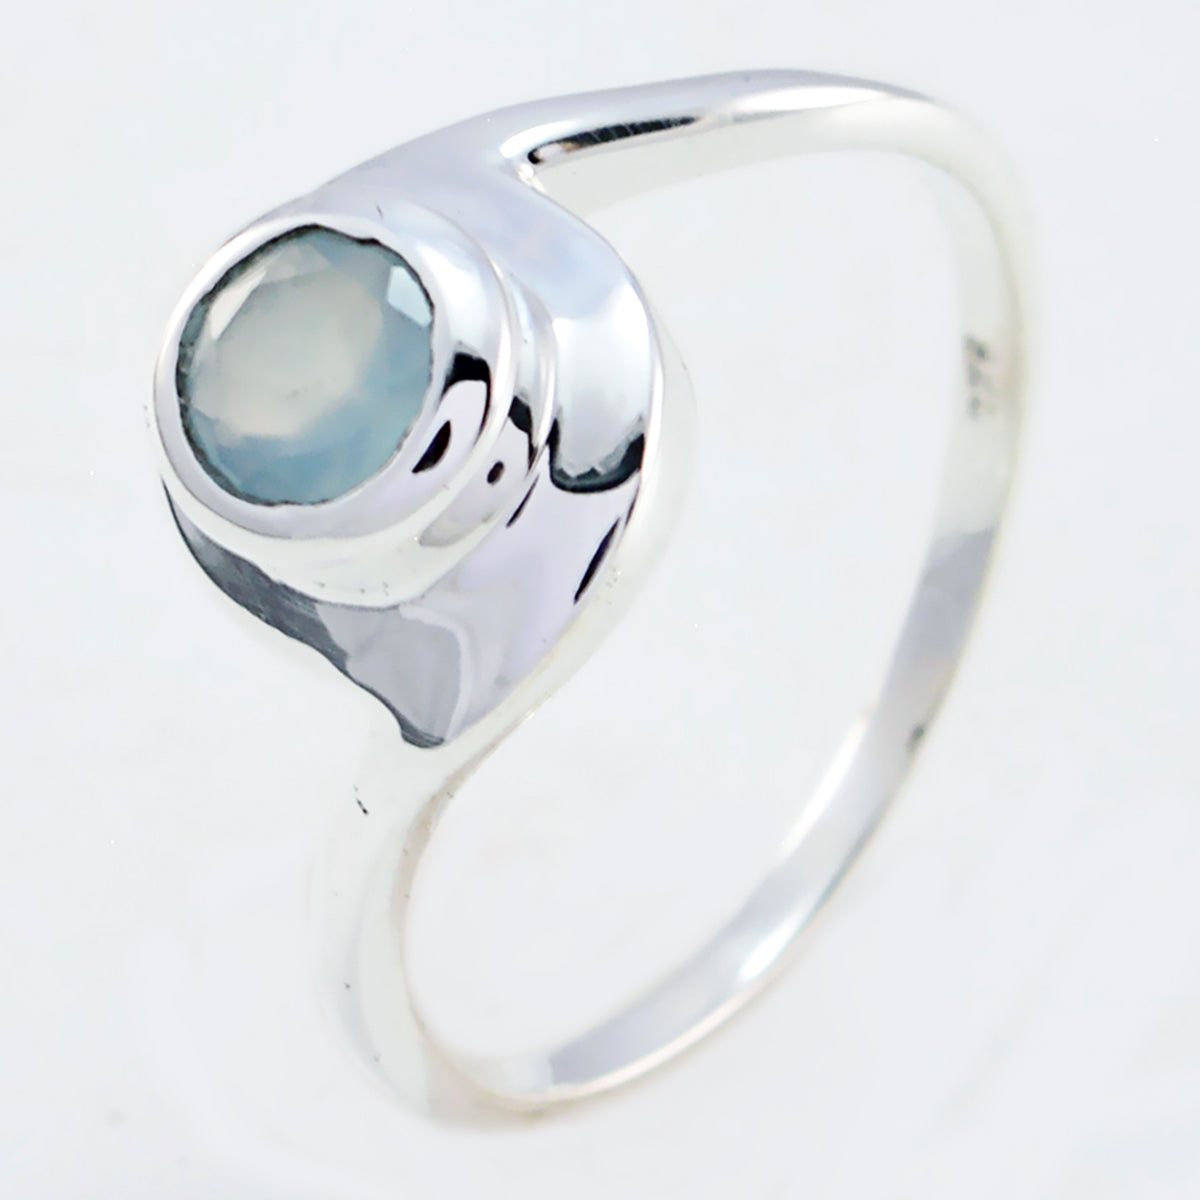 Sublime Gem Aqua Chalcedony 925 Sterling Silver Ring Good Selling Items